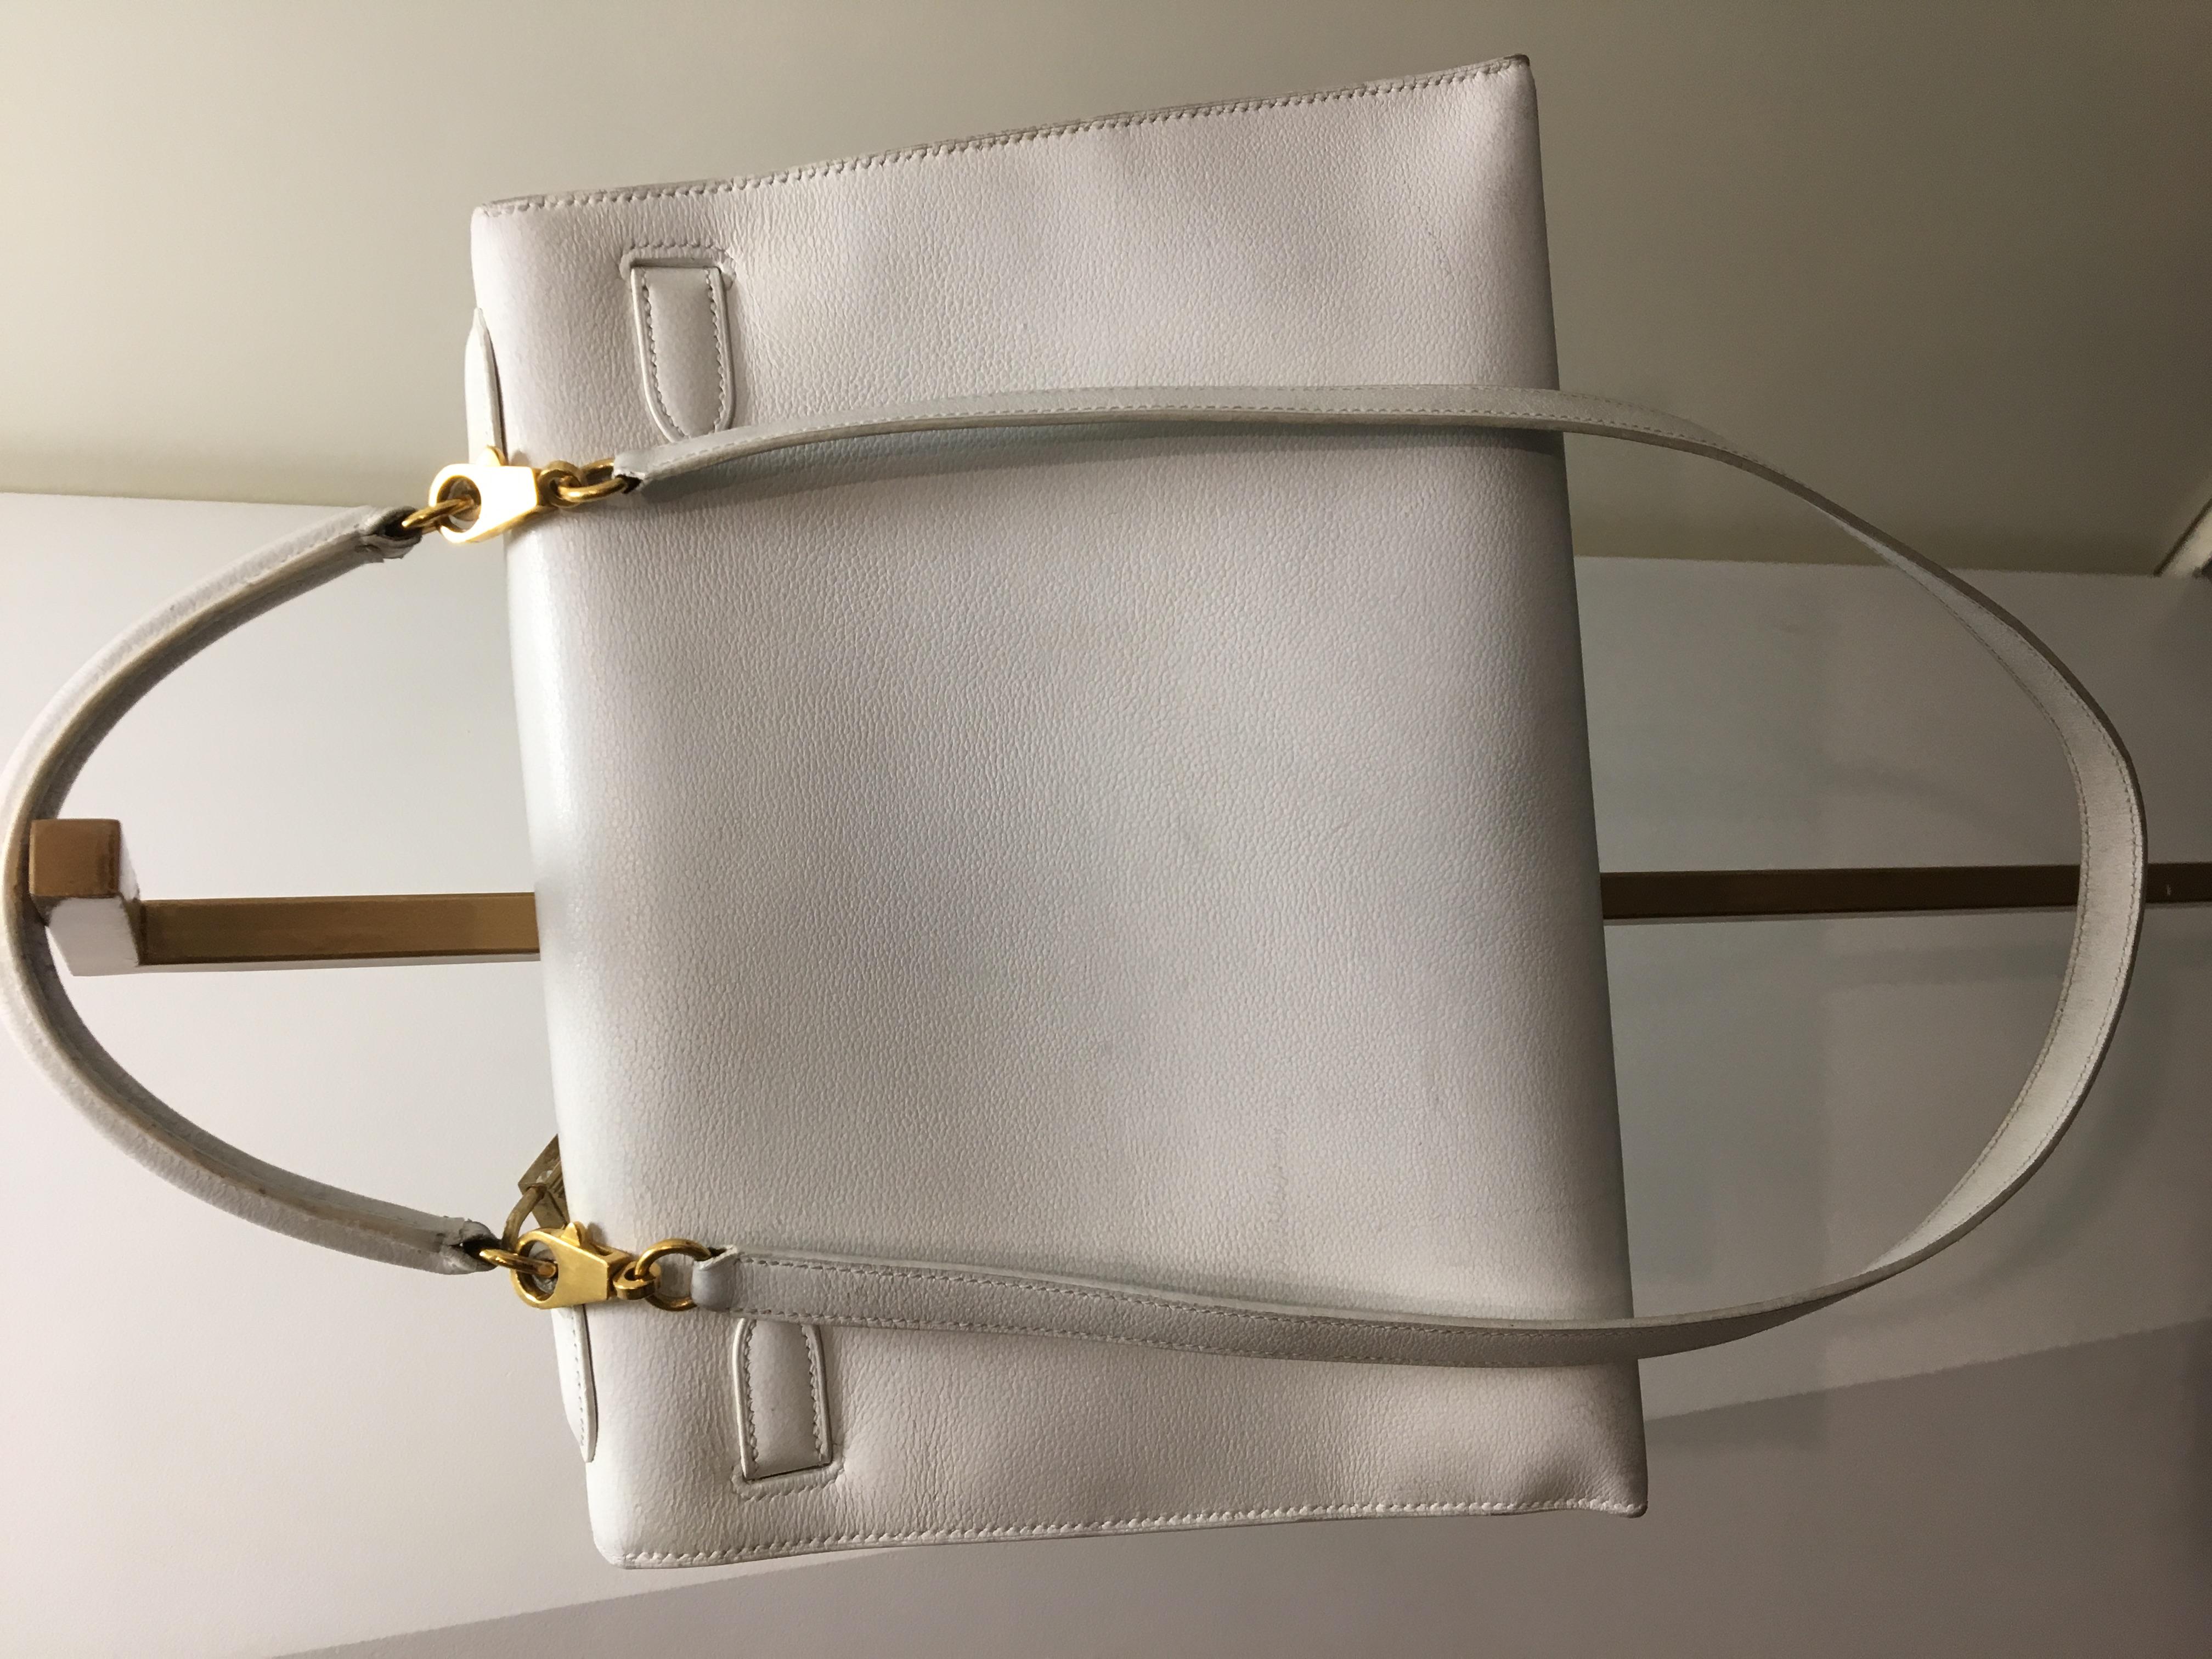 Vintage Kelly 32 in white leather and golden hardware
Good vintage condition but obviously it presents some signs of use ( please see photos)
The upper part of the clochette is broken 
Sold with strap